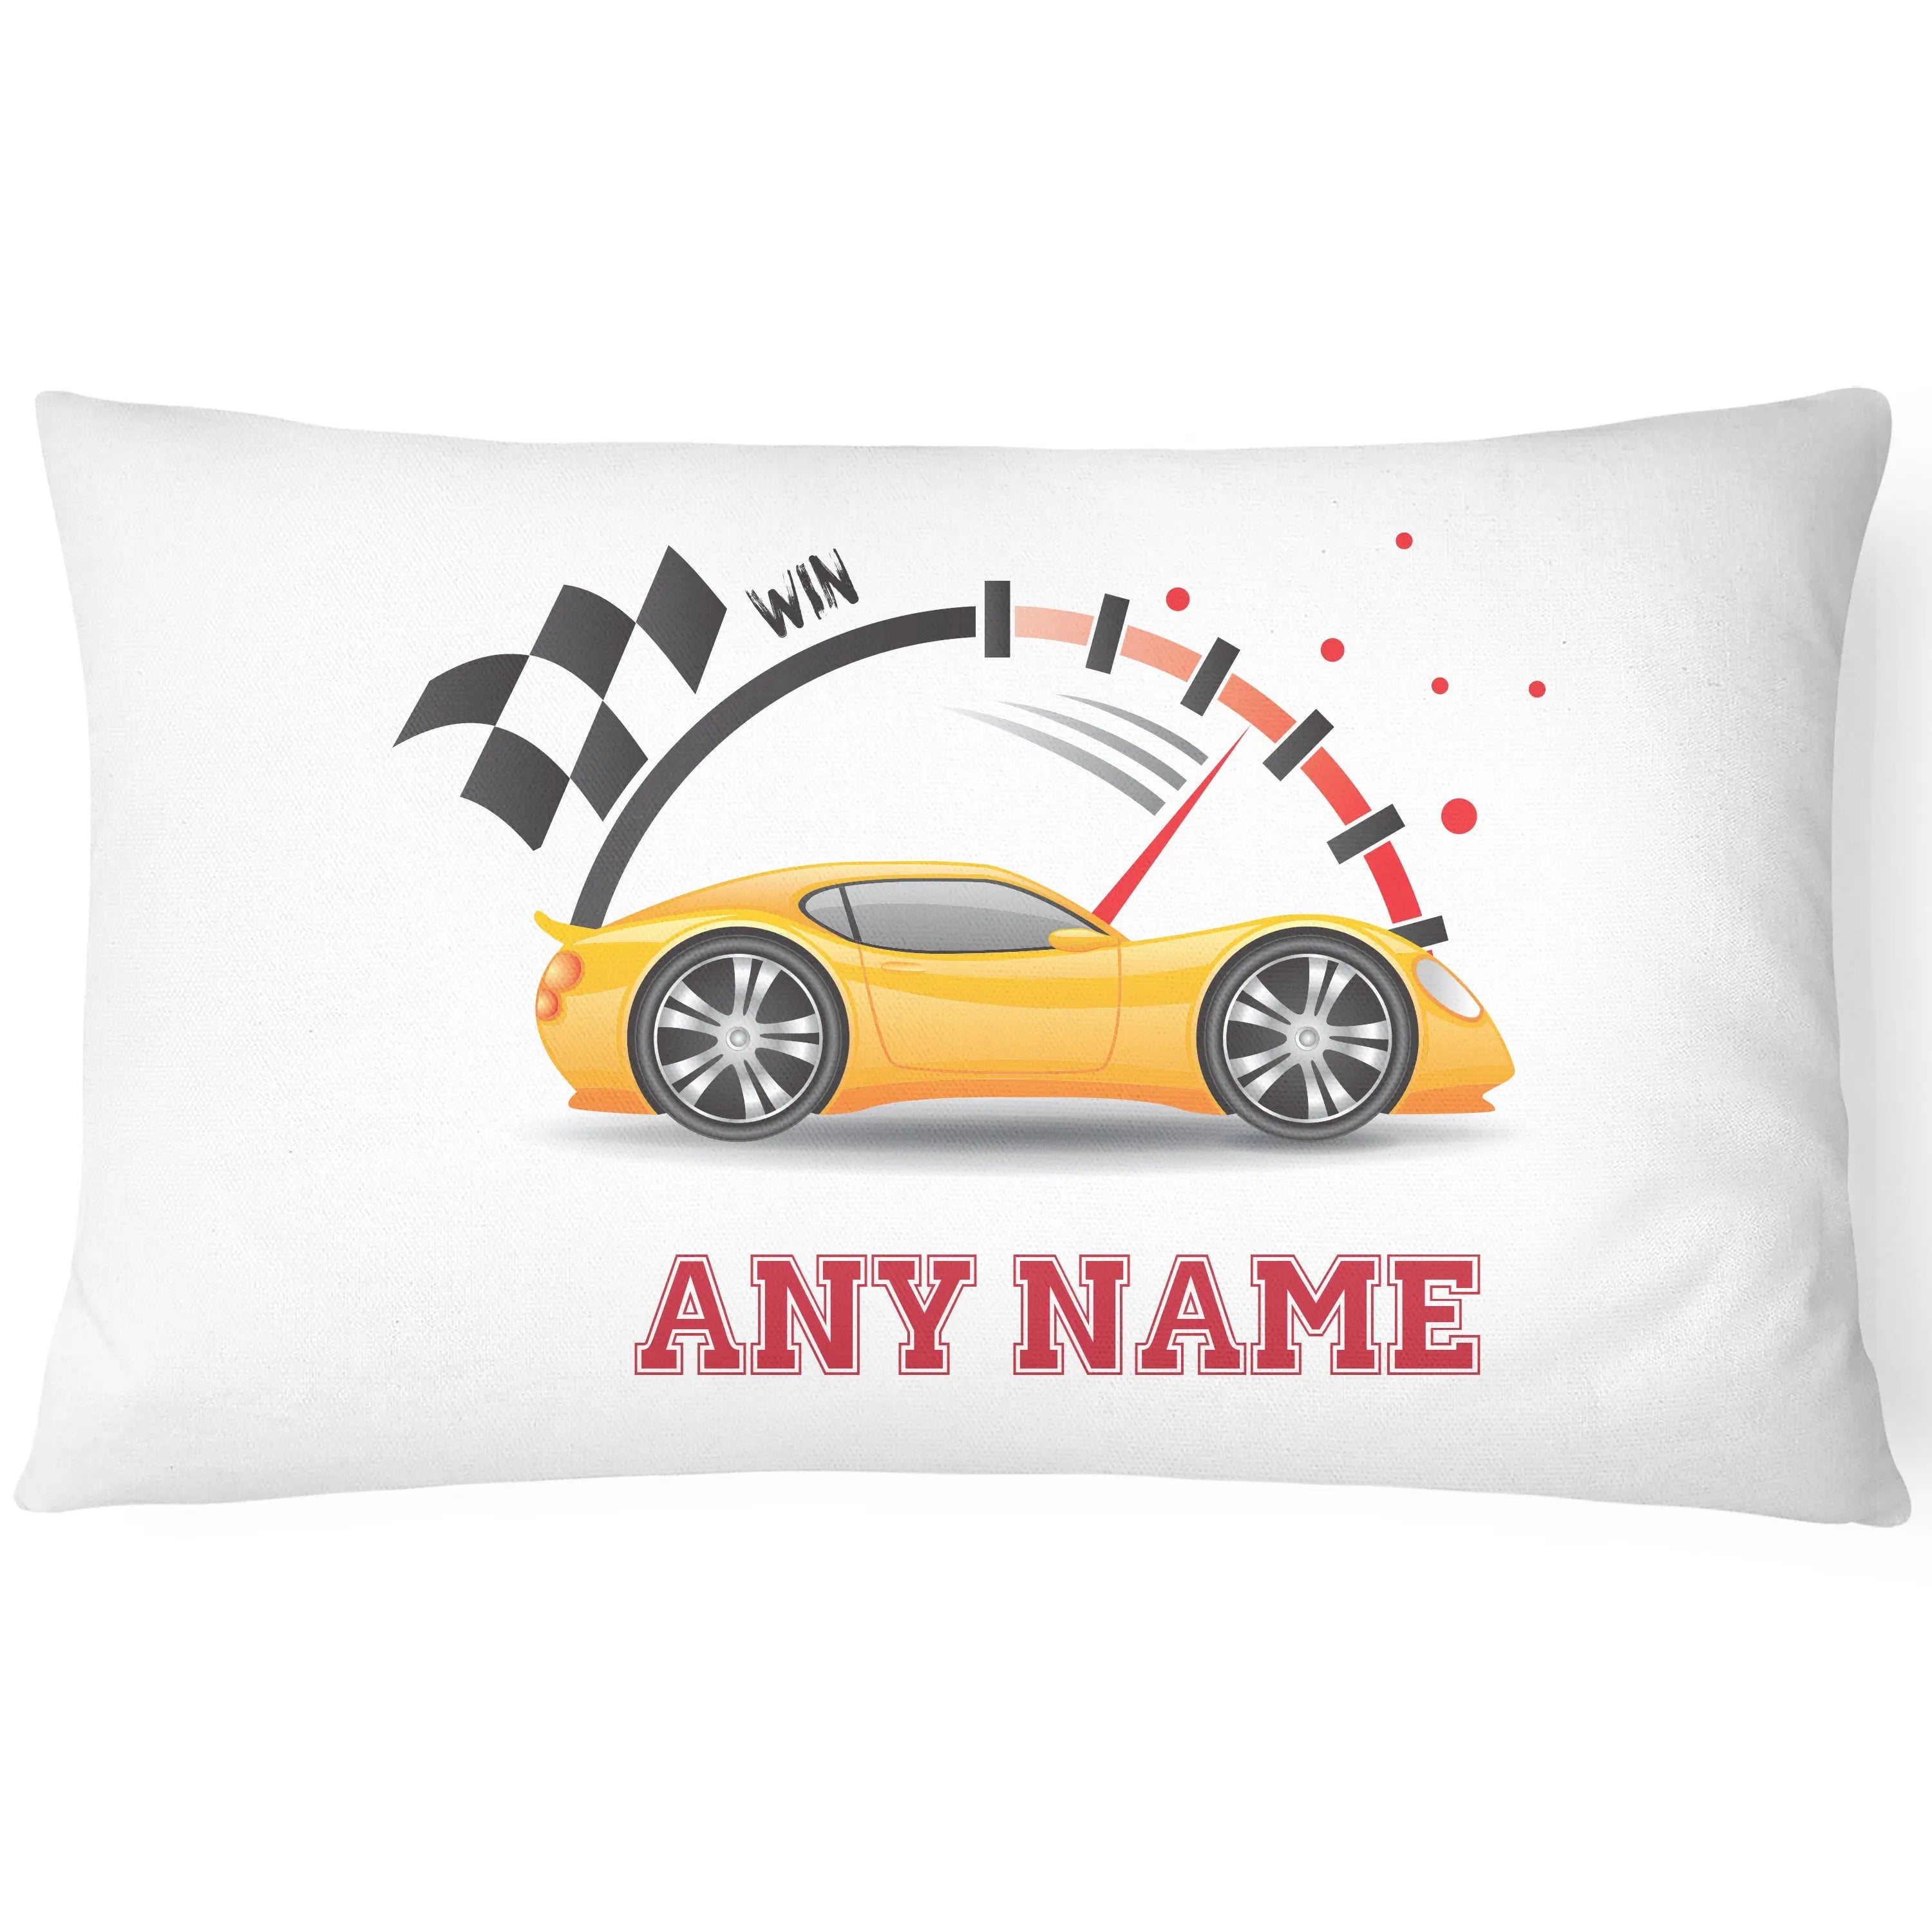 Race Car Pillowcase for Kids - Personalise With Any Name - Perfect Children's Gift - Sunny - CushionPop